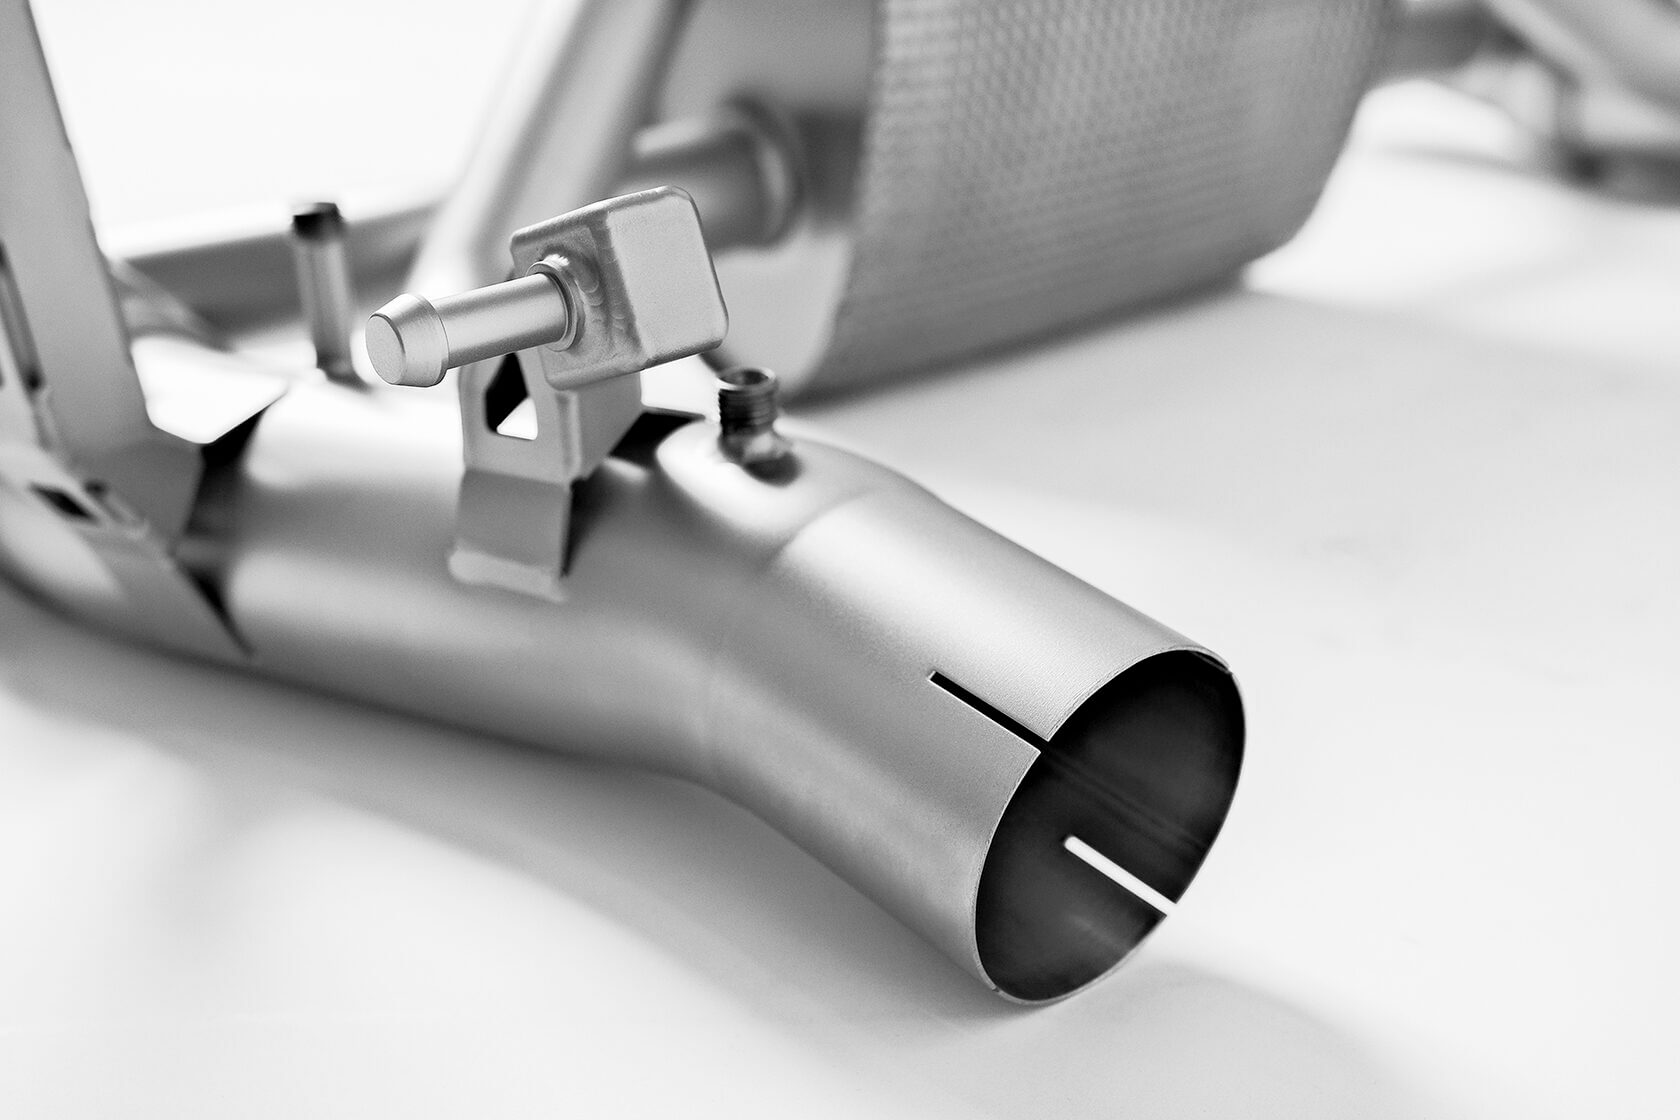 DEIKIN 10-FER.F8.TRI-ES-SS-01 Exhaust system Stainless steel for Ferrari F8 Tributo Polished steel Photo-2 